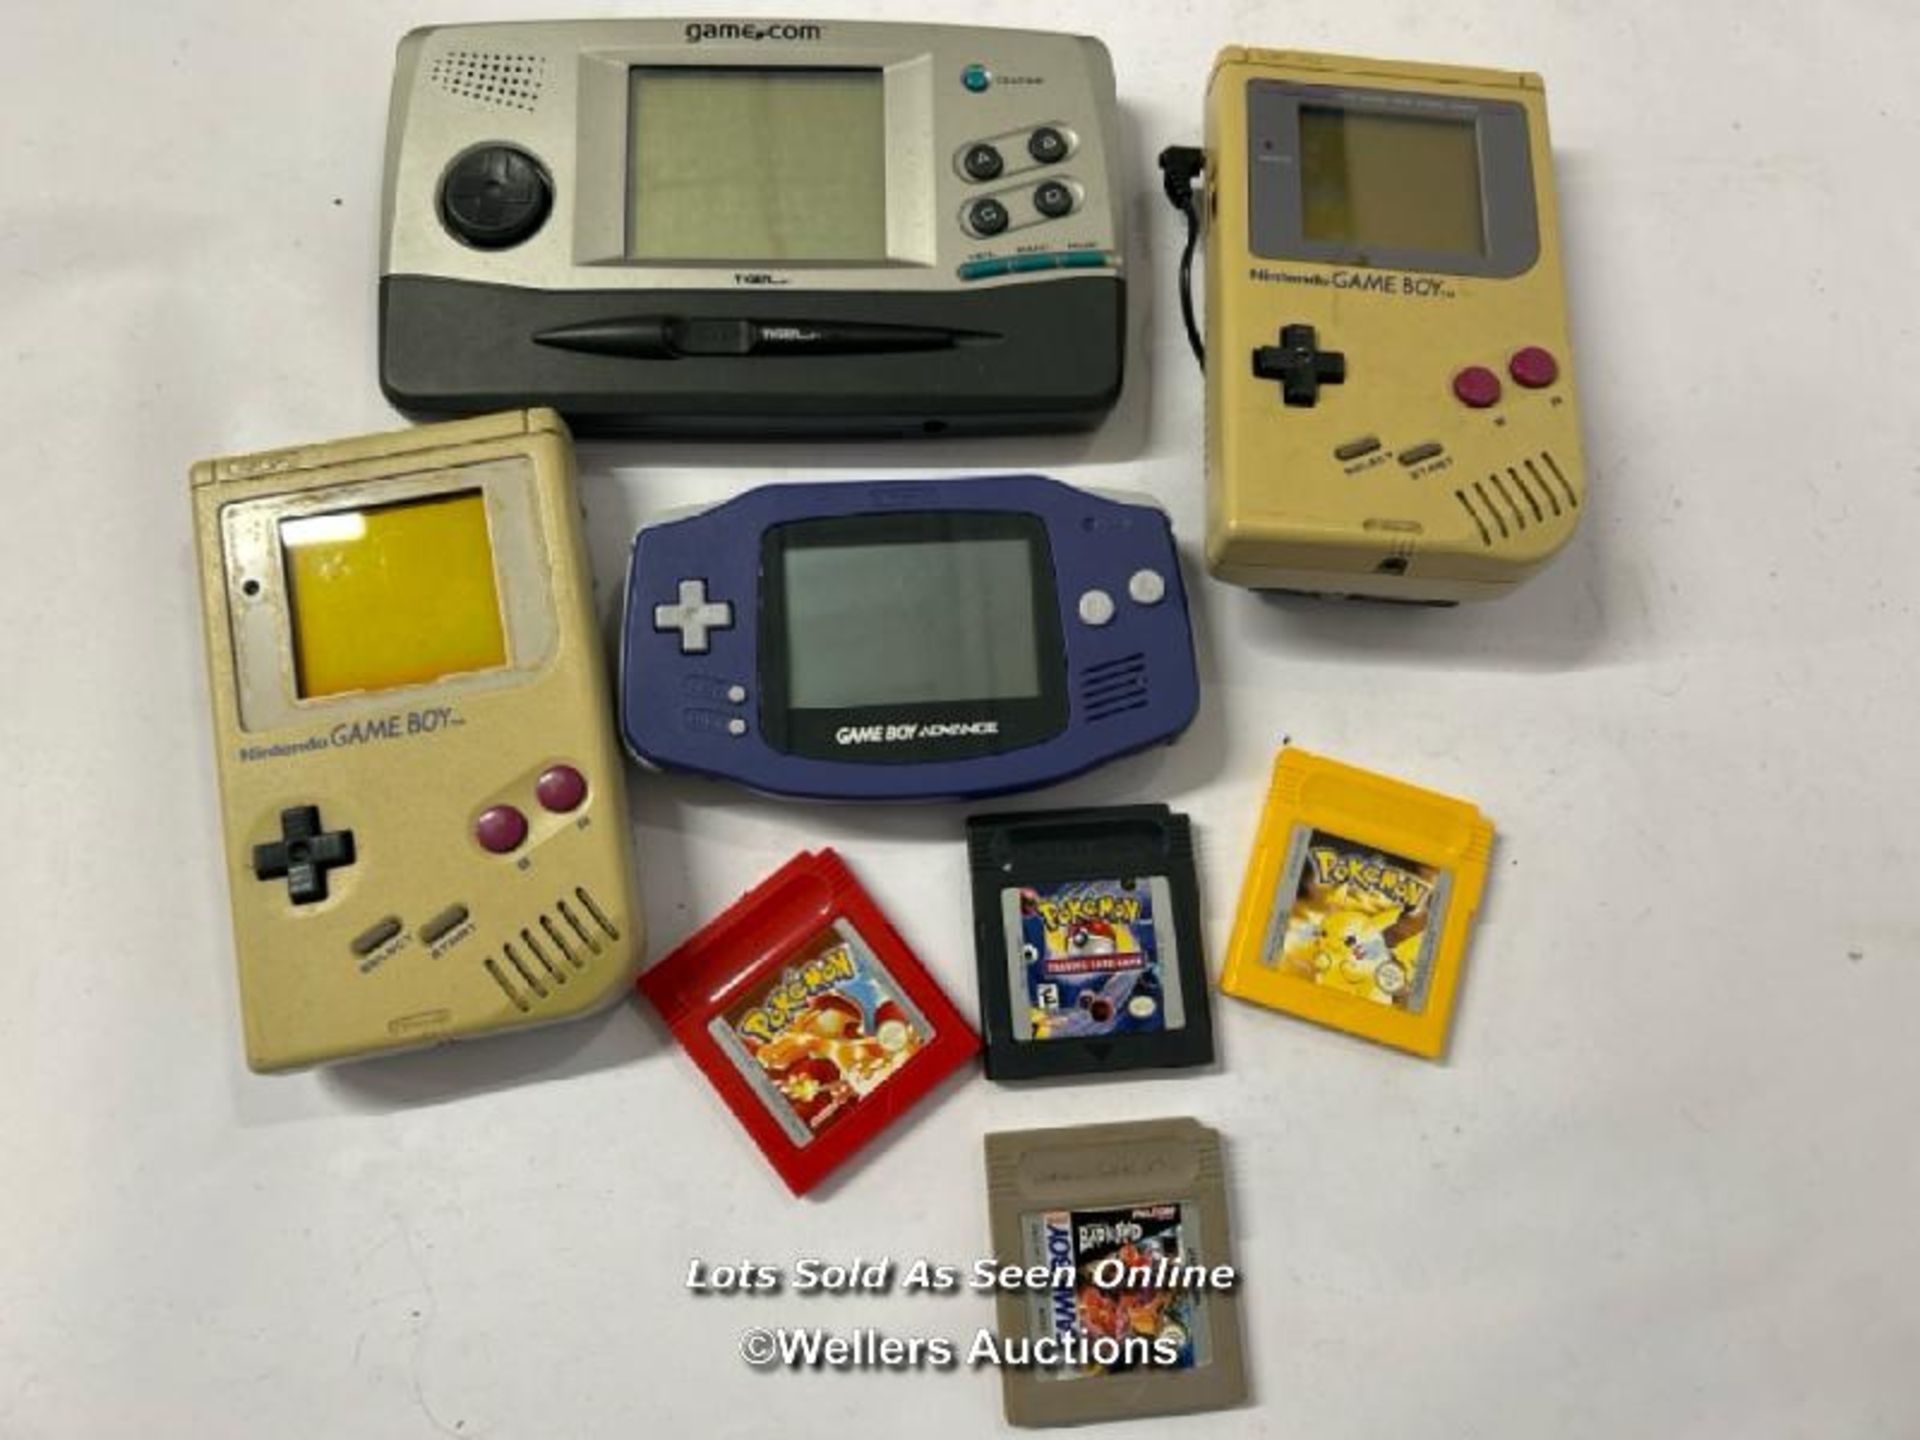 Three vintage hand held Game Boy consoles, all as found with three Pokémon games and Bad 'n' Rad